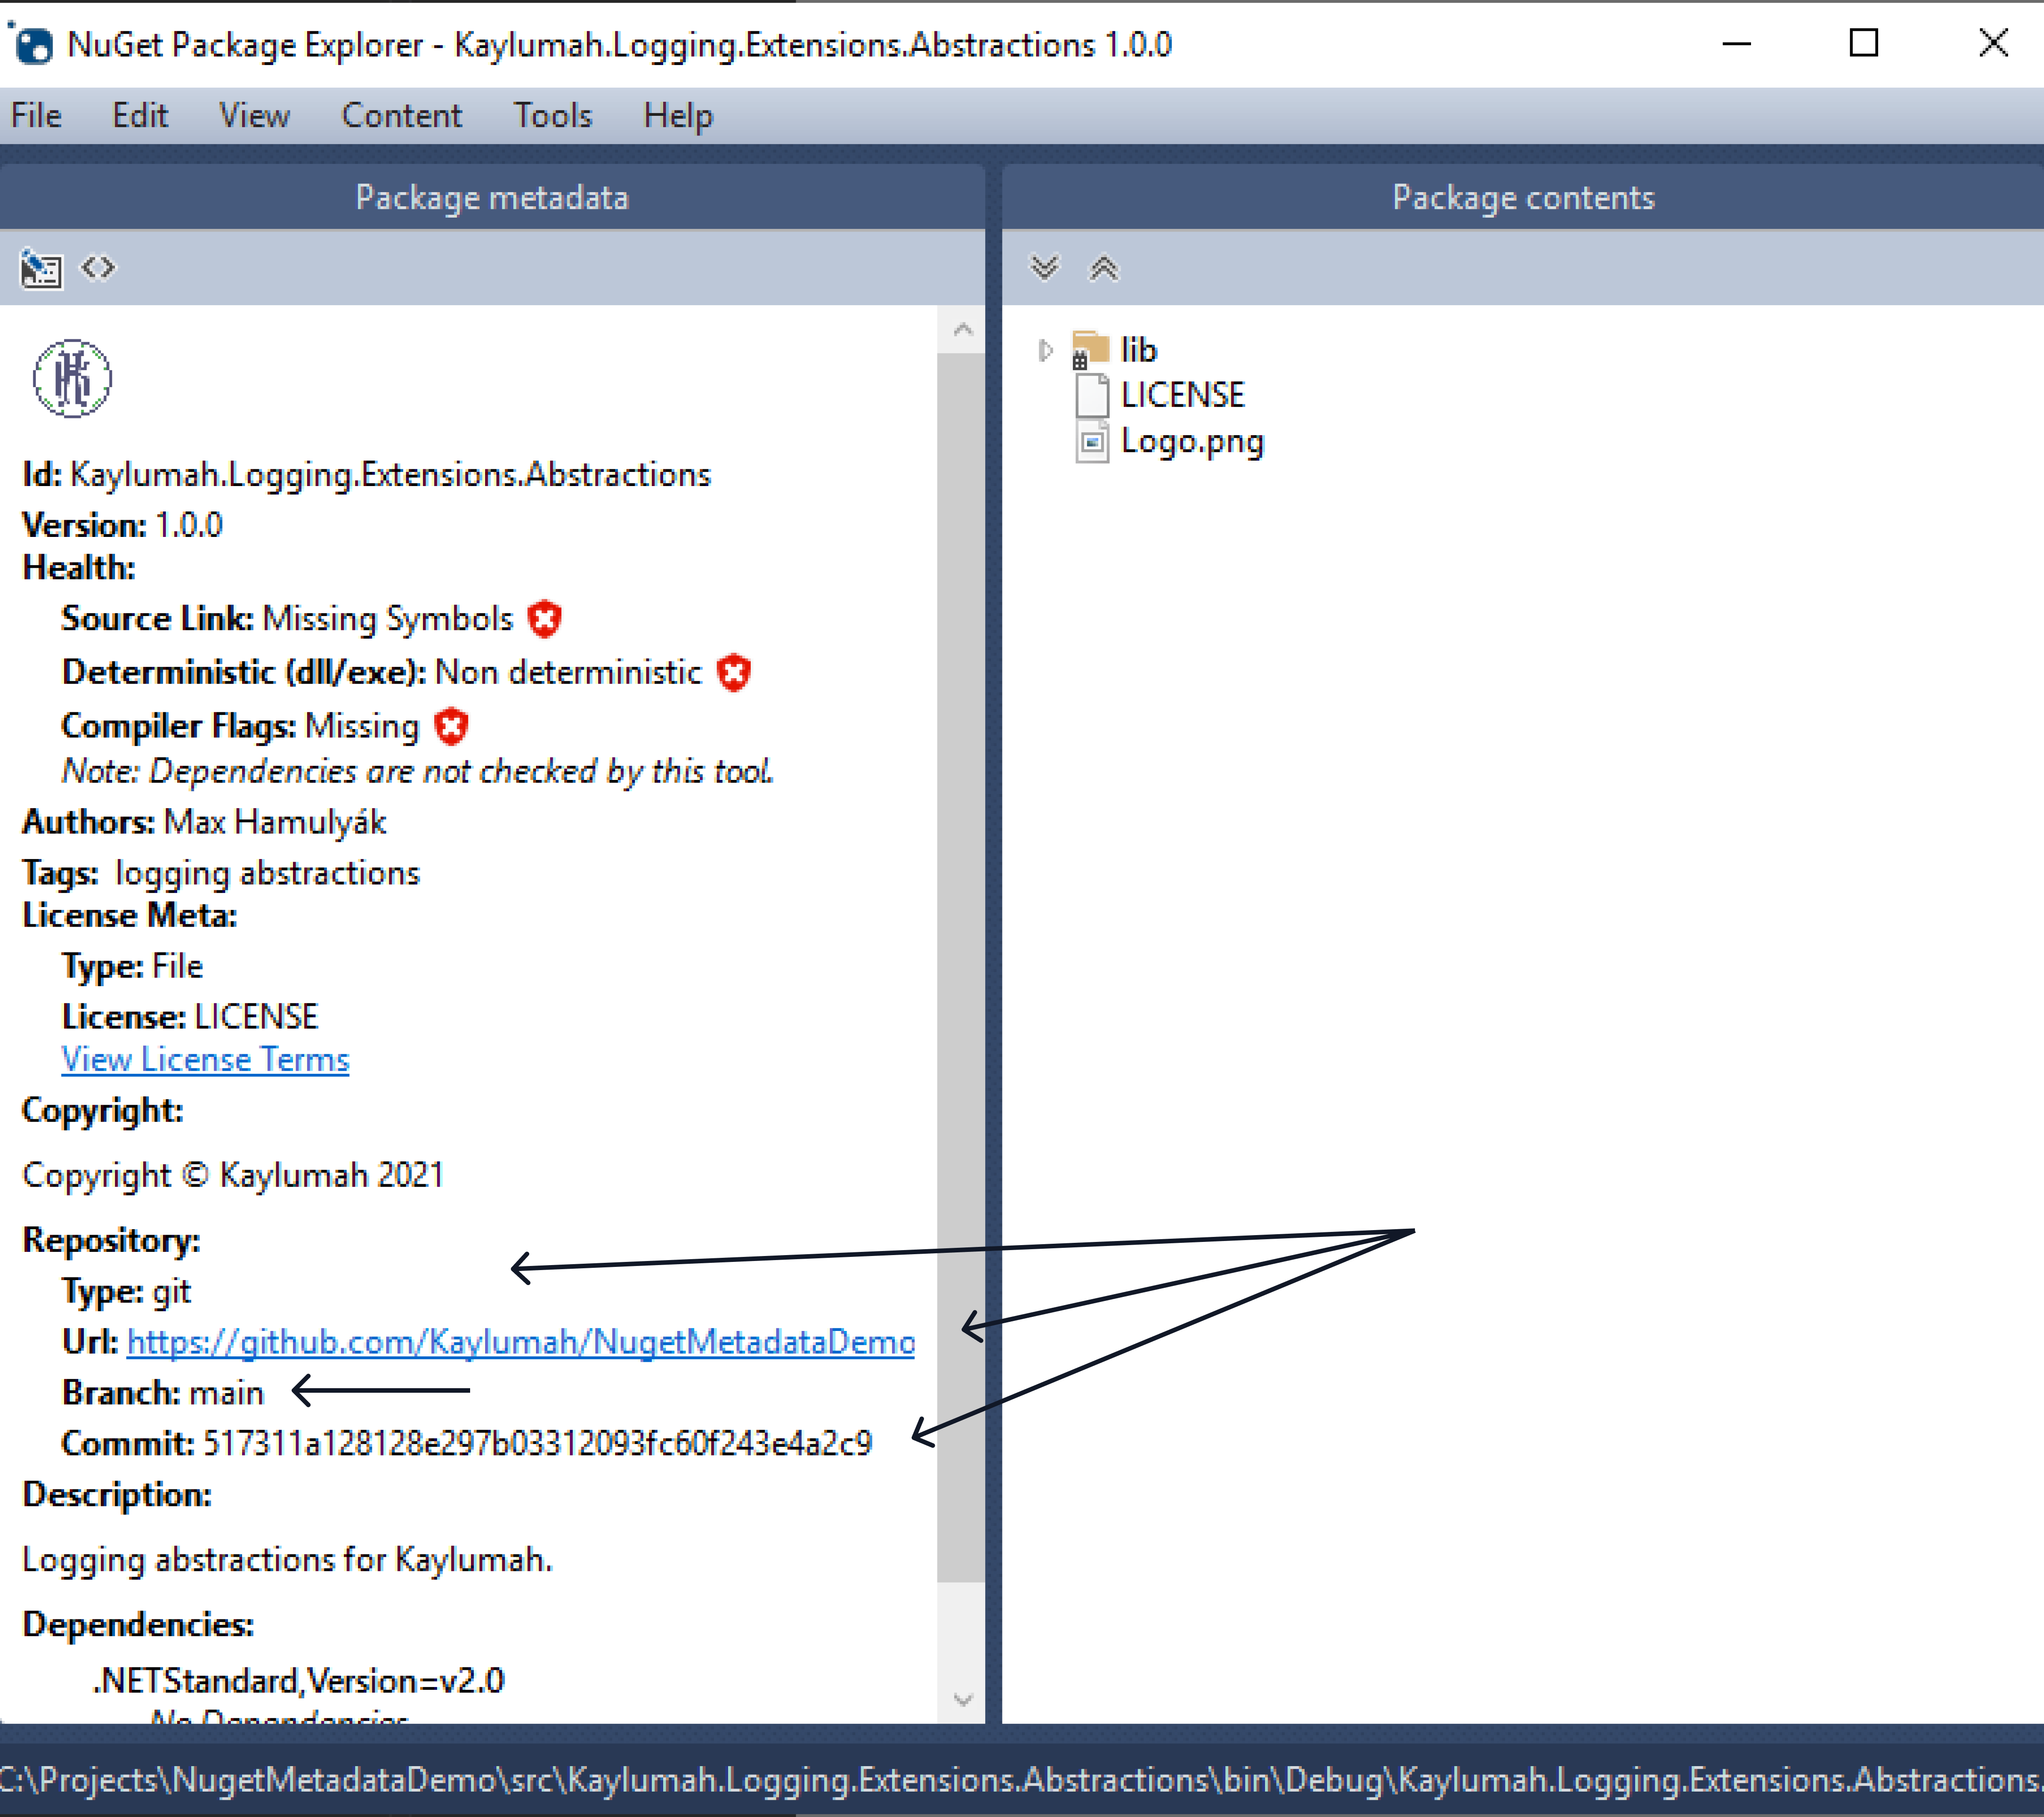 Repo Info in NuGet Package Explorer